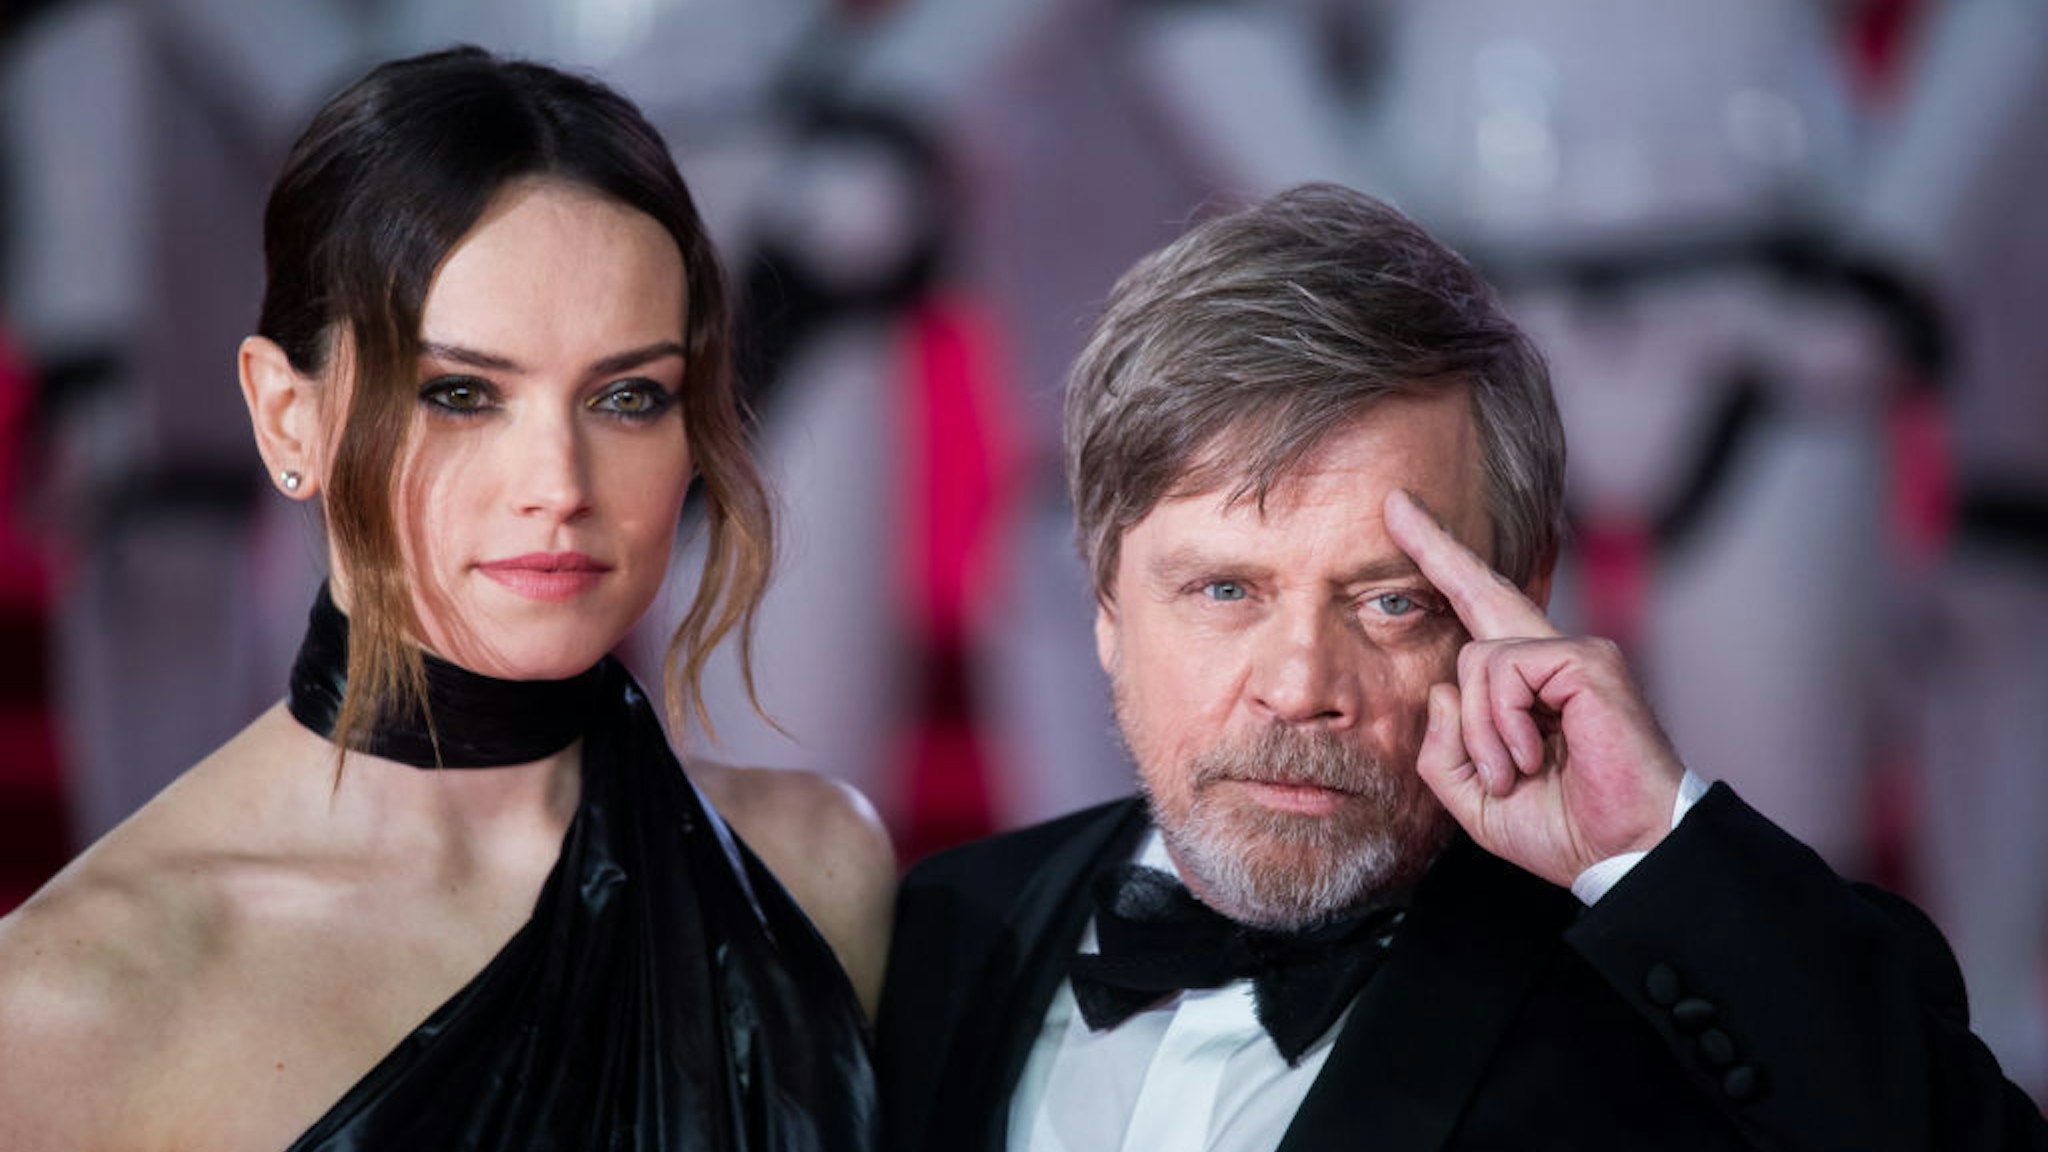 Daisy Ridley and Mark Hamill attend the European Premiere of 'Star Wars: The Last Jedi' at Royal Albert Hall on December 12, 2017 in London, England. (Photo by Samir Hussein/Samir Hussein/WireImage)